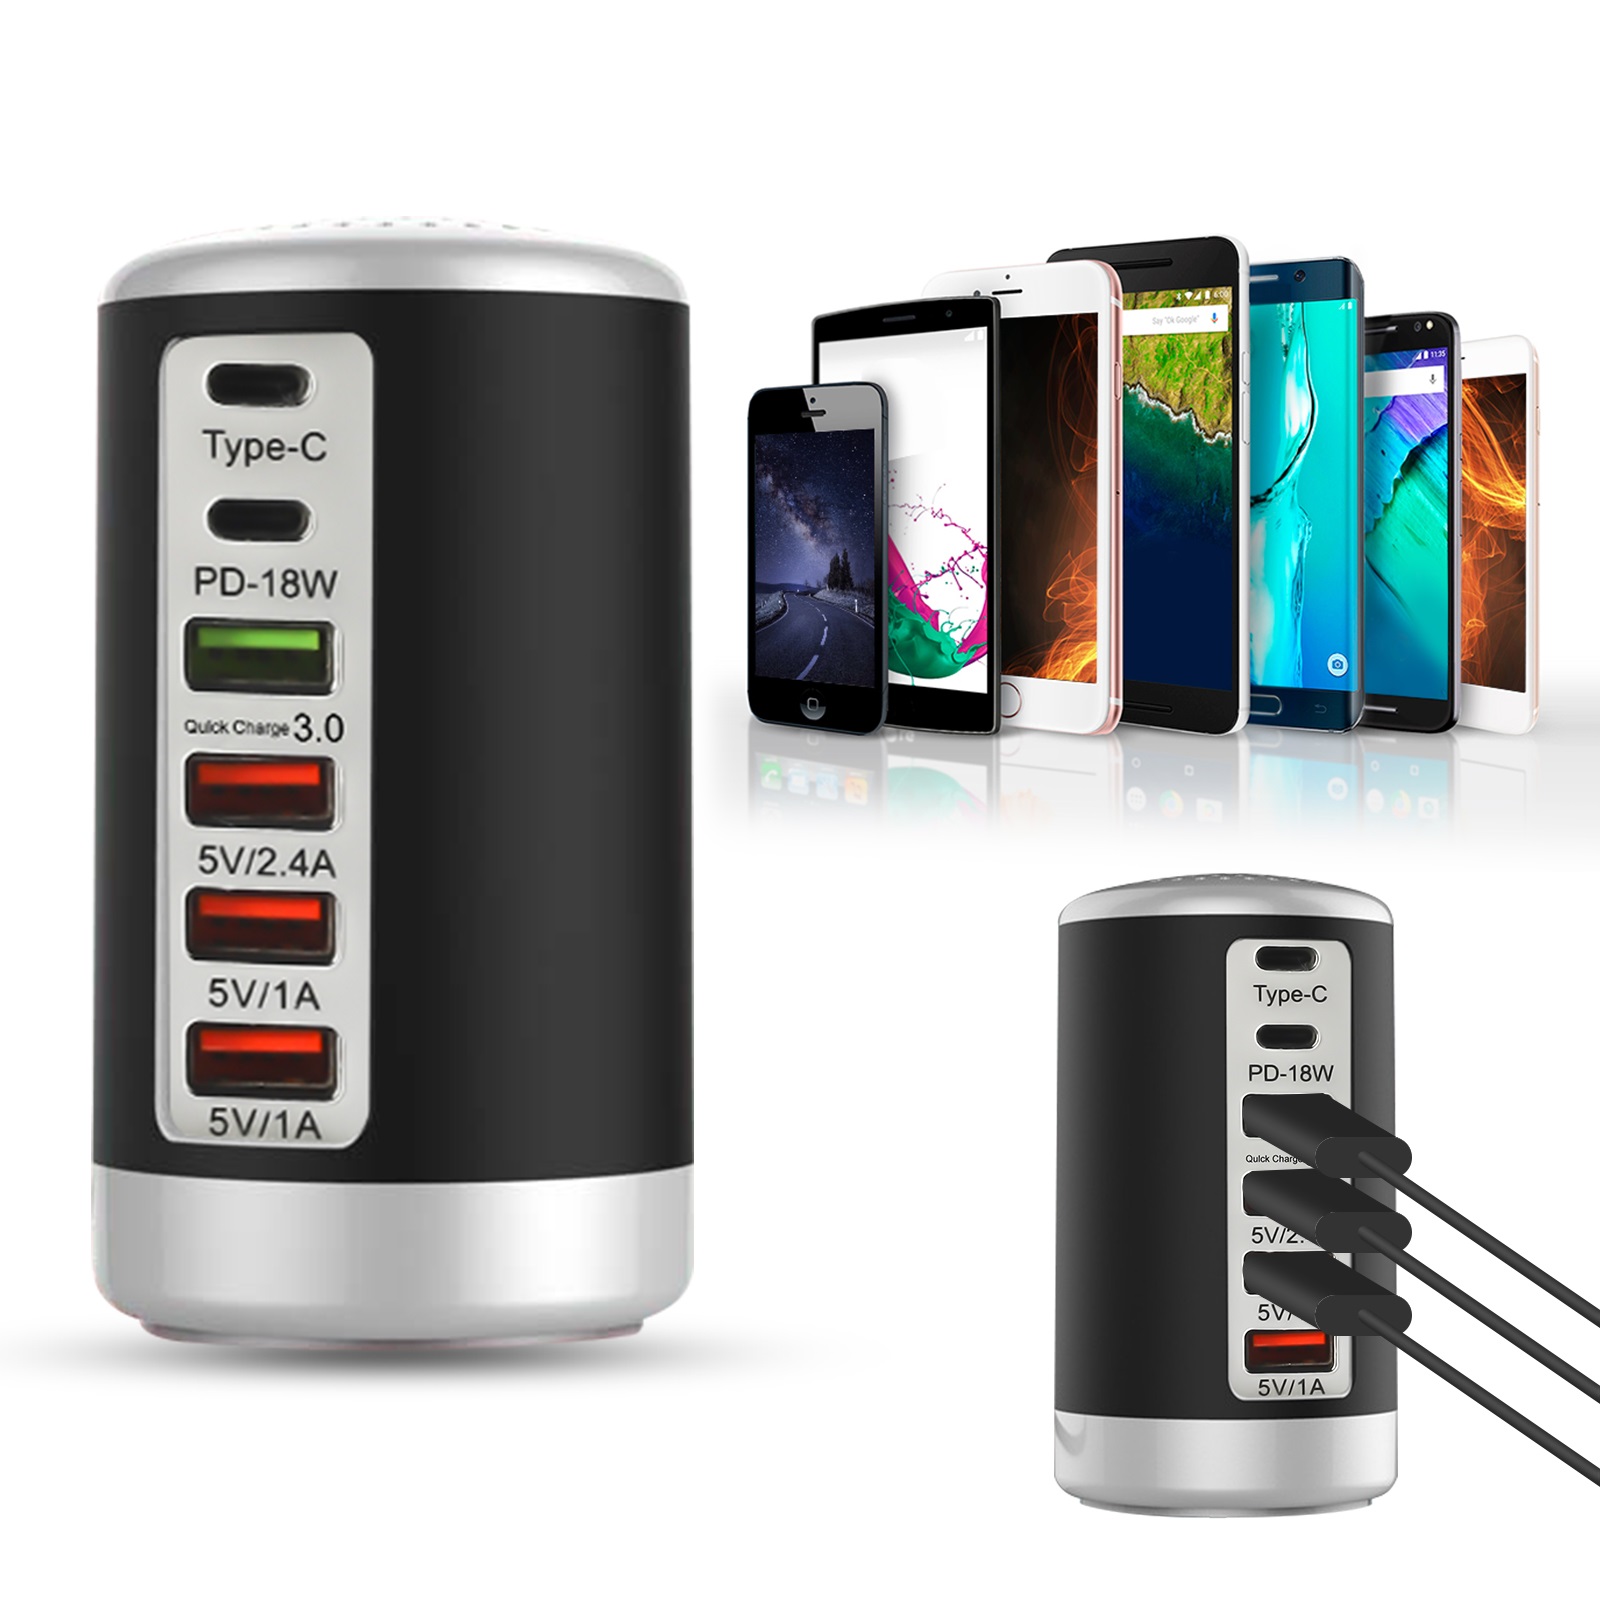 USB Charger, TSV 65W 6 Port Desktop USB Charging Station Hub Wall Charger (3 USB+Type C+QC3.0+PD 18W), Fast Charging Multi-Port Rapid Adapter Compatible with iPad, Smartphones, Tablets - image 1 of 9